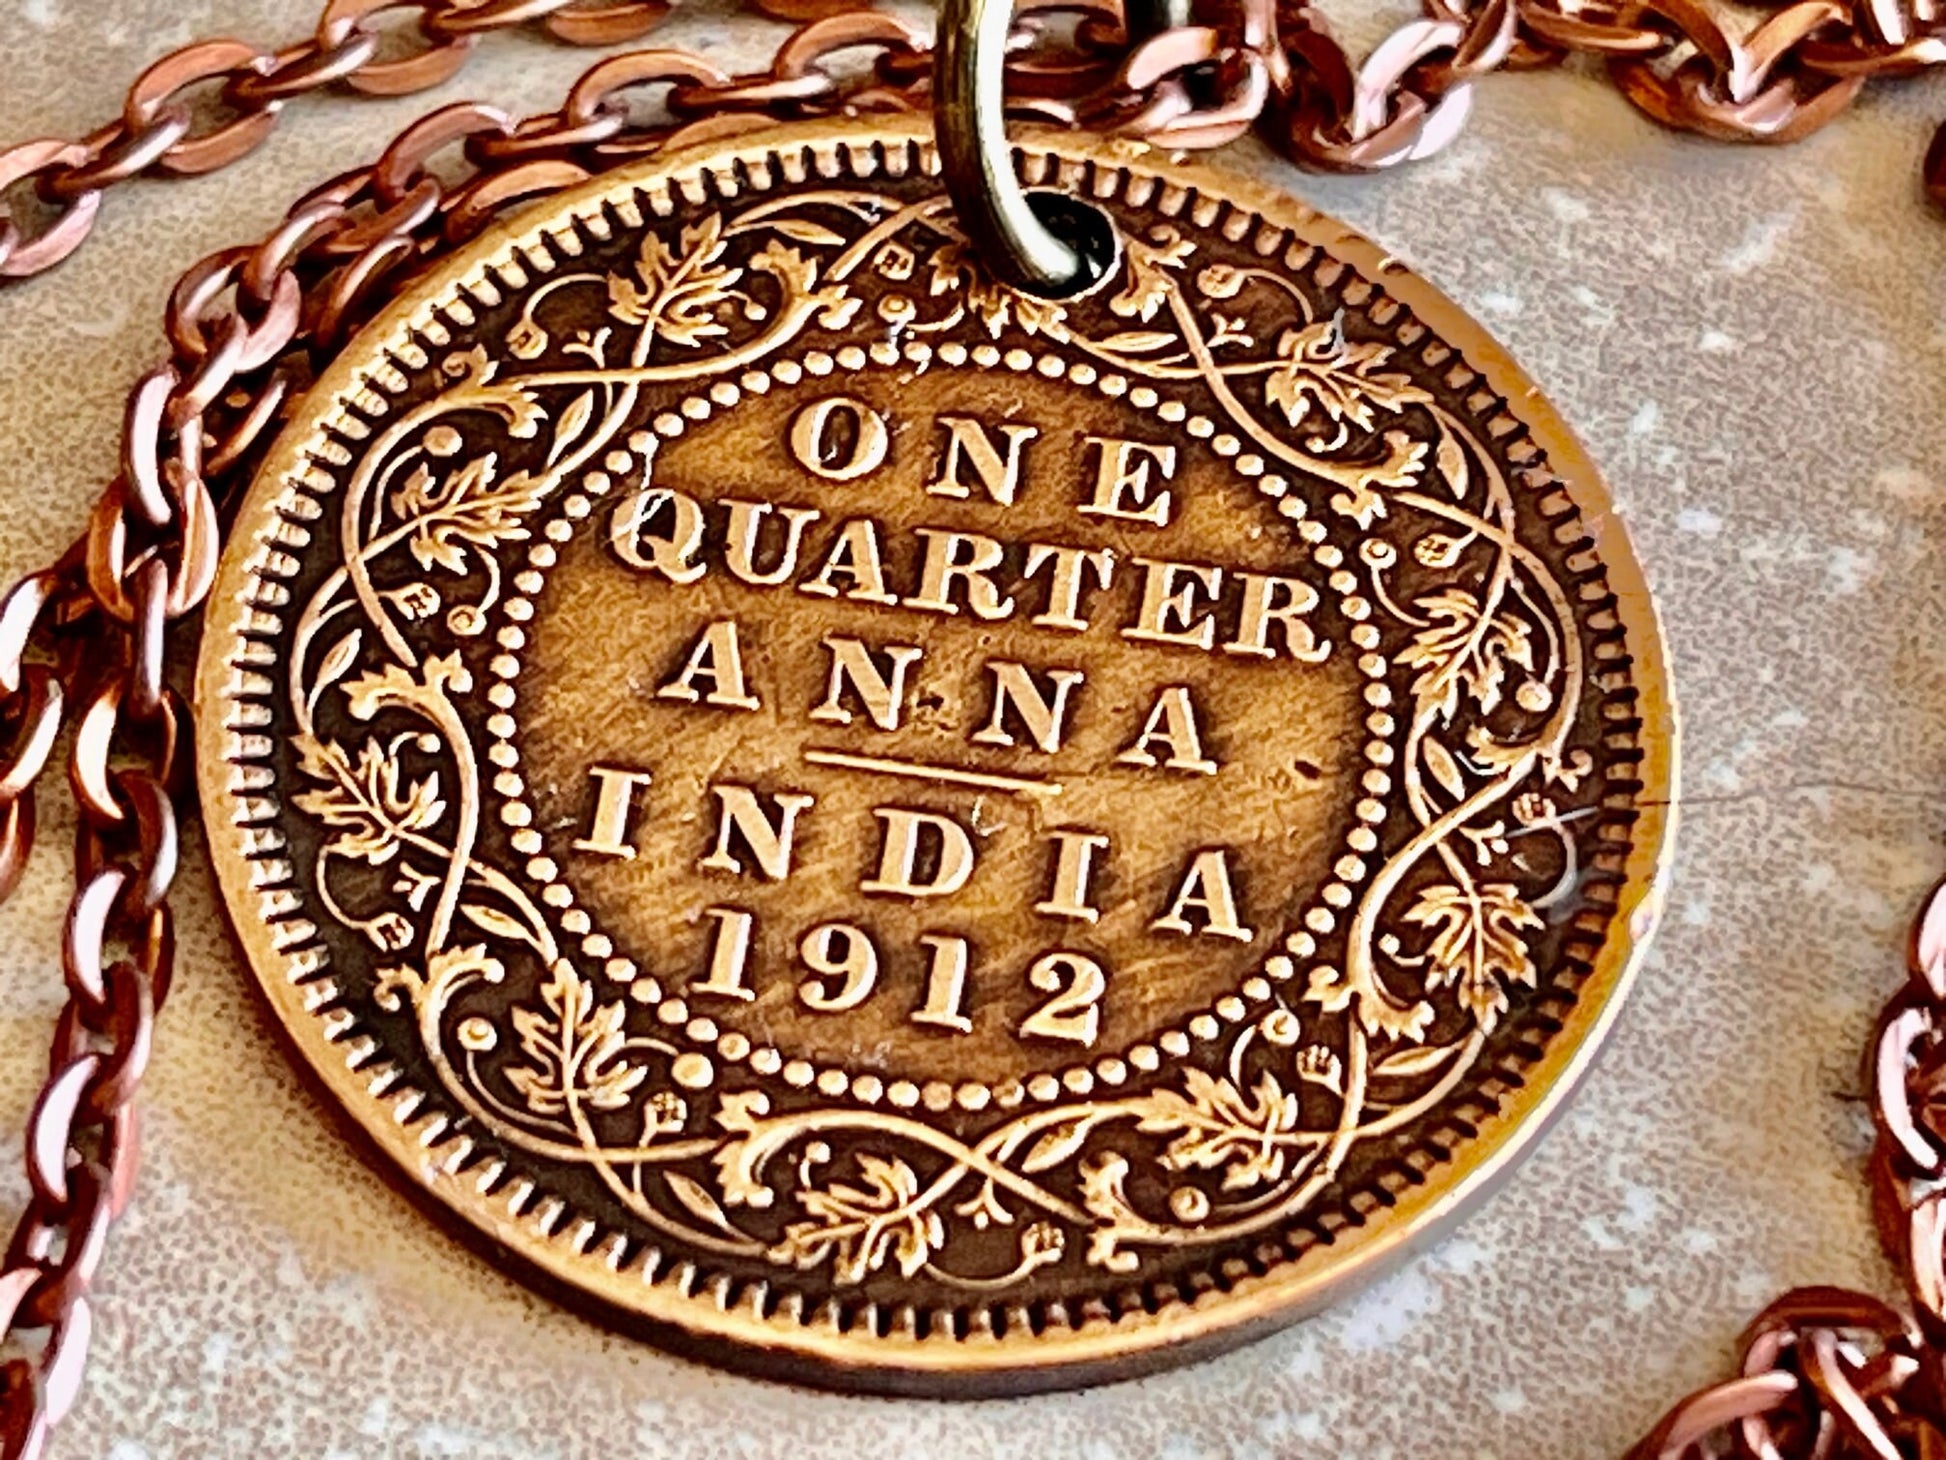 India Coin Pendant Quarter Anna East Indian Personal Necklace Vintage Handmade Jewelry Gift Friend Charm For Him Her World Coin Collector